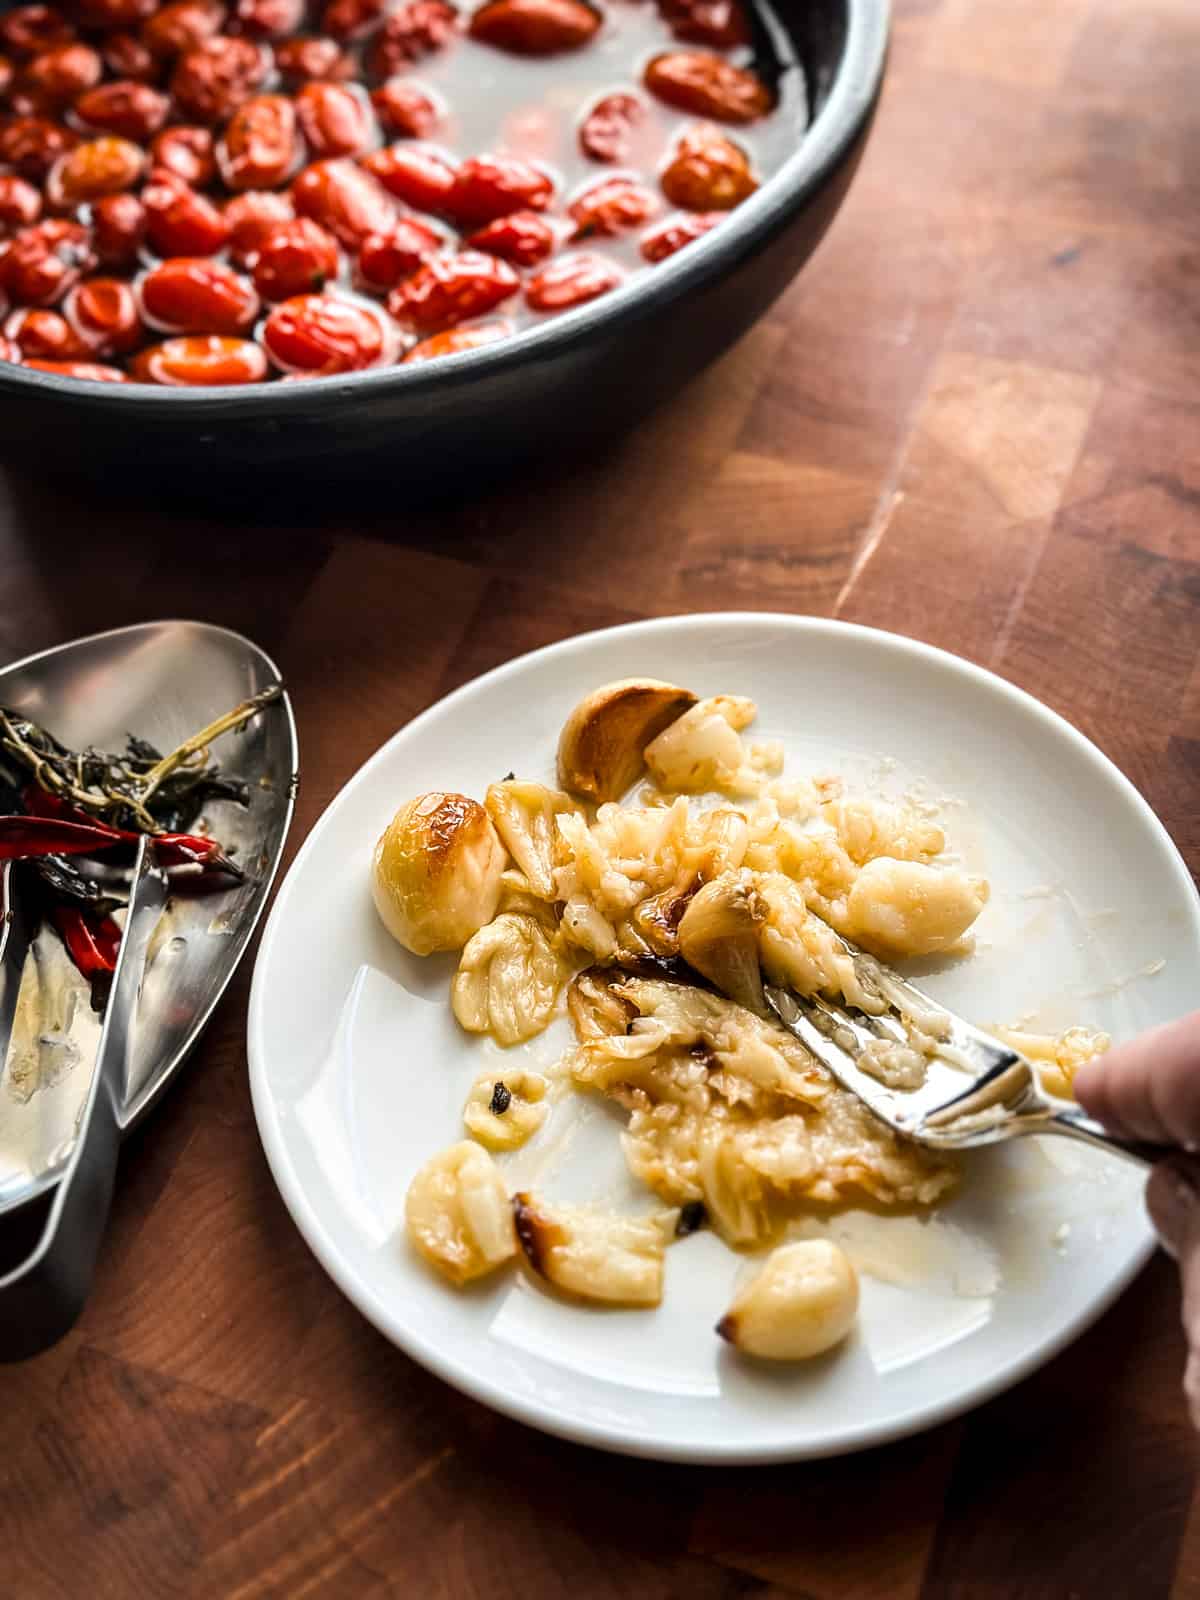 A hand is crushing roasted garlic cloves on a late with a fork. Partial view of a baking pan with tomatoes and a small plate with chili peppers and herbs.